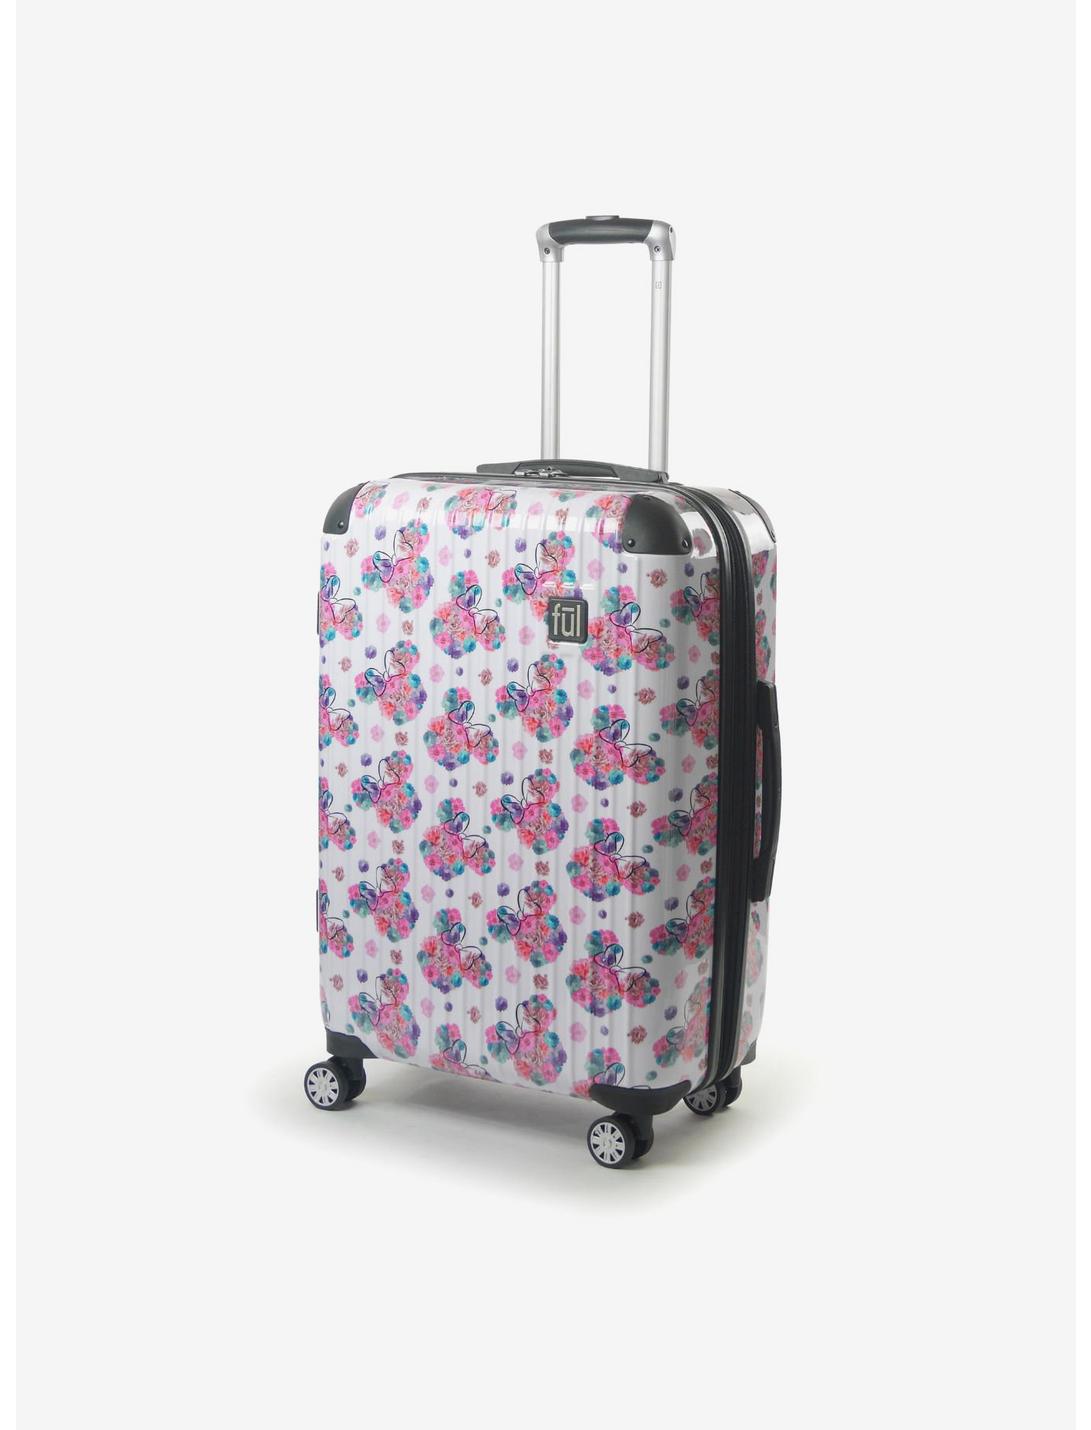 FUL Disney Minnie Mouse Floral 25 Inch Printed Hardside Rolling Luggage, , hi-res